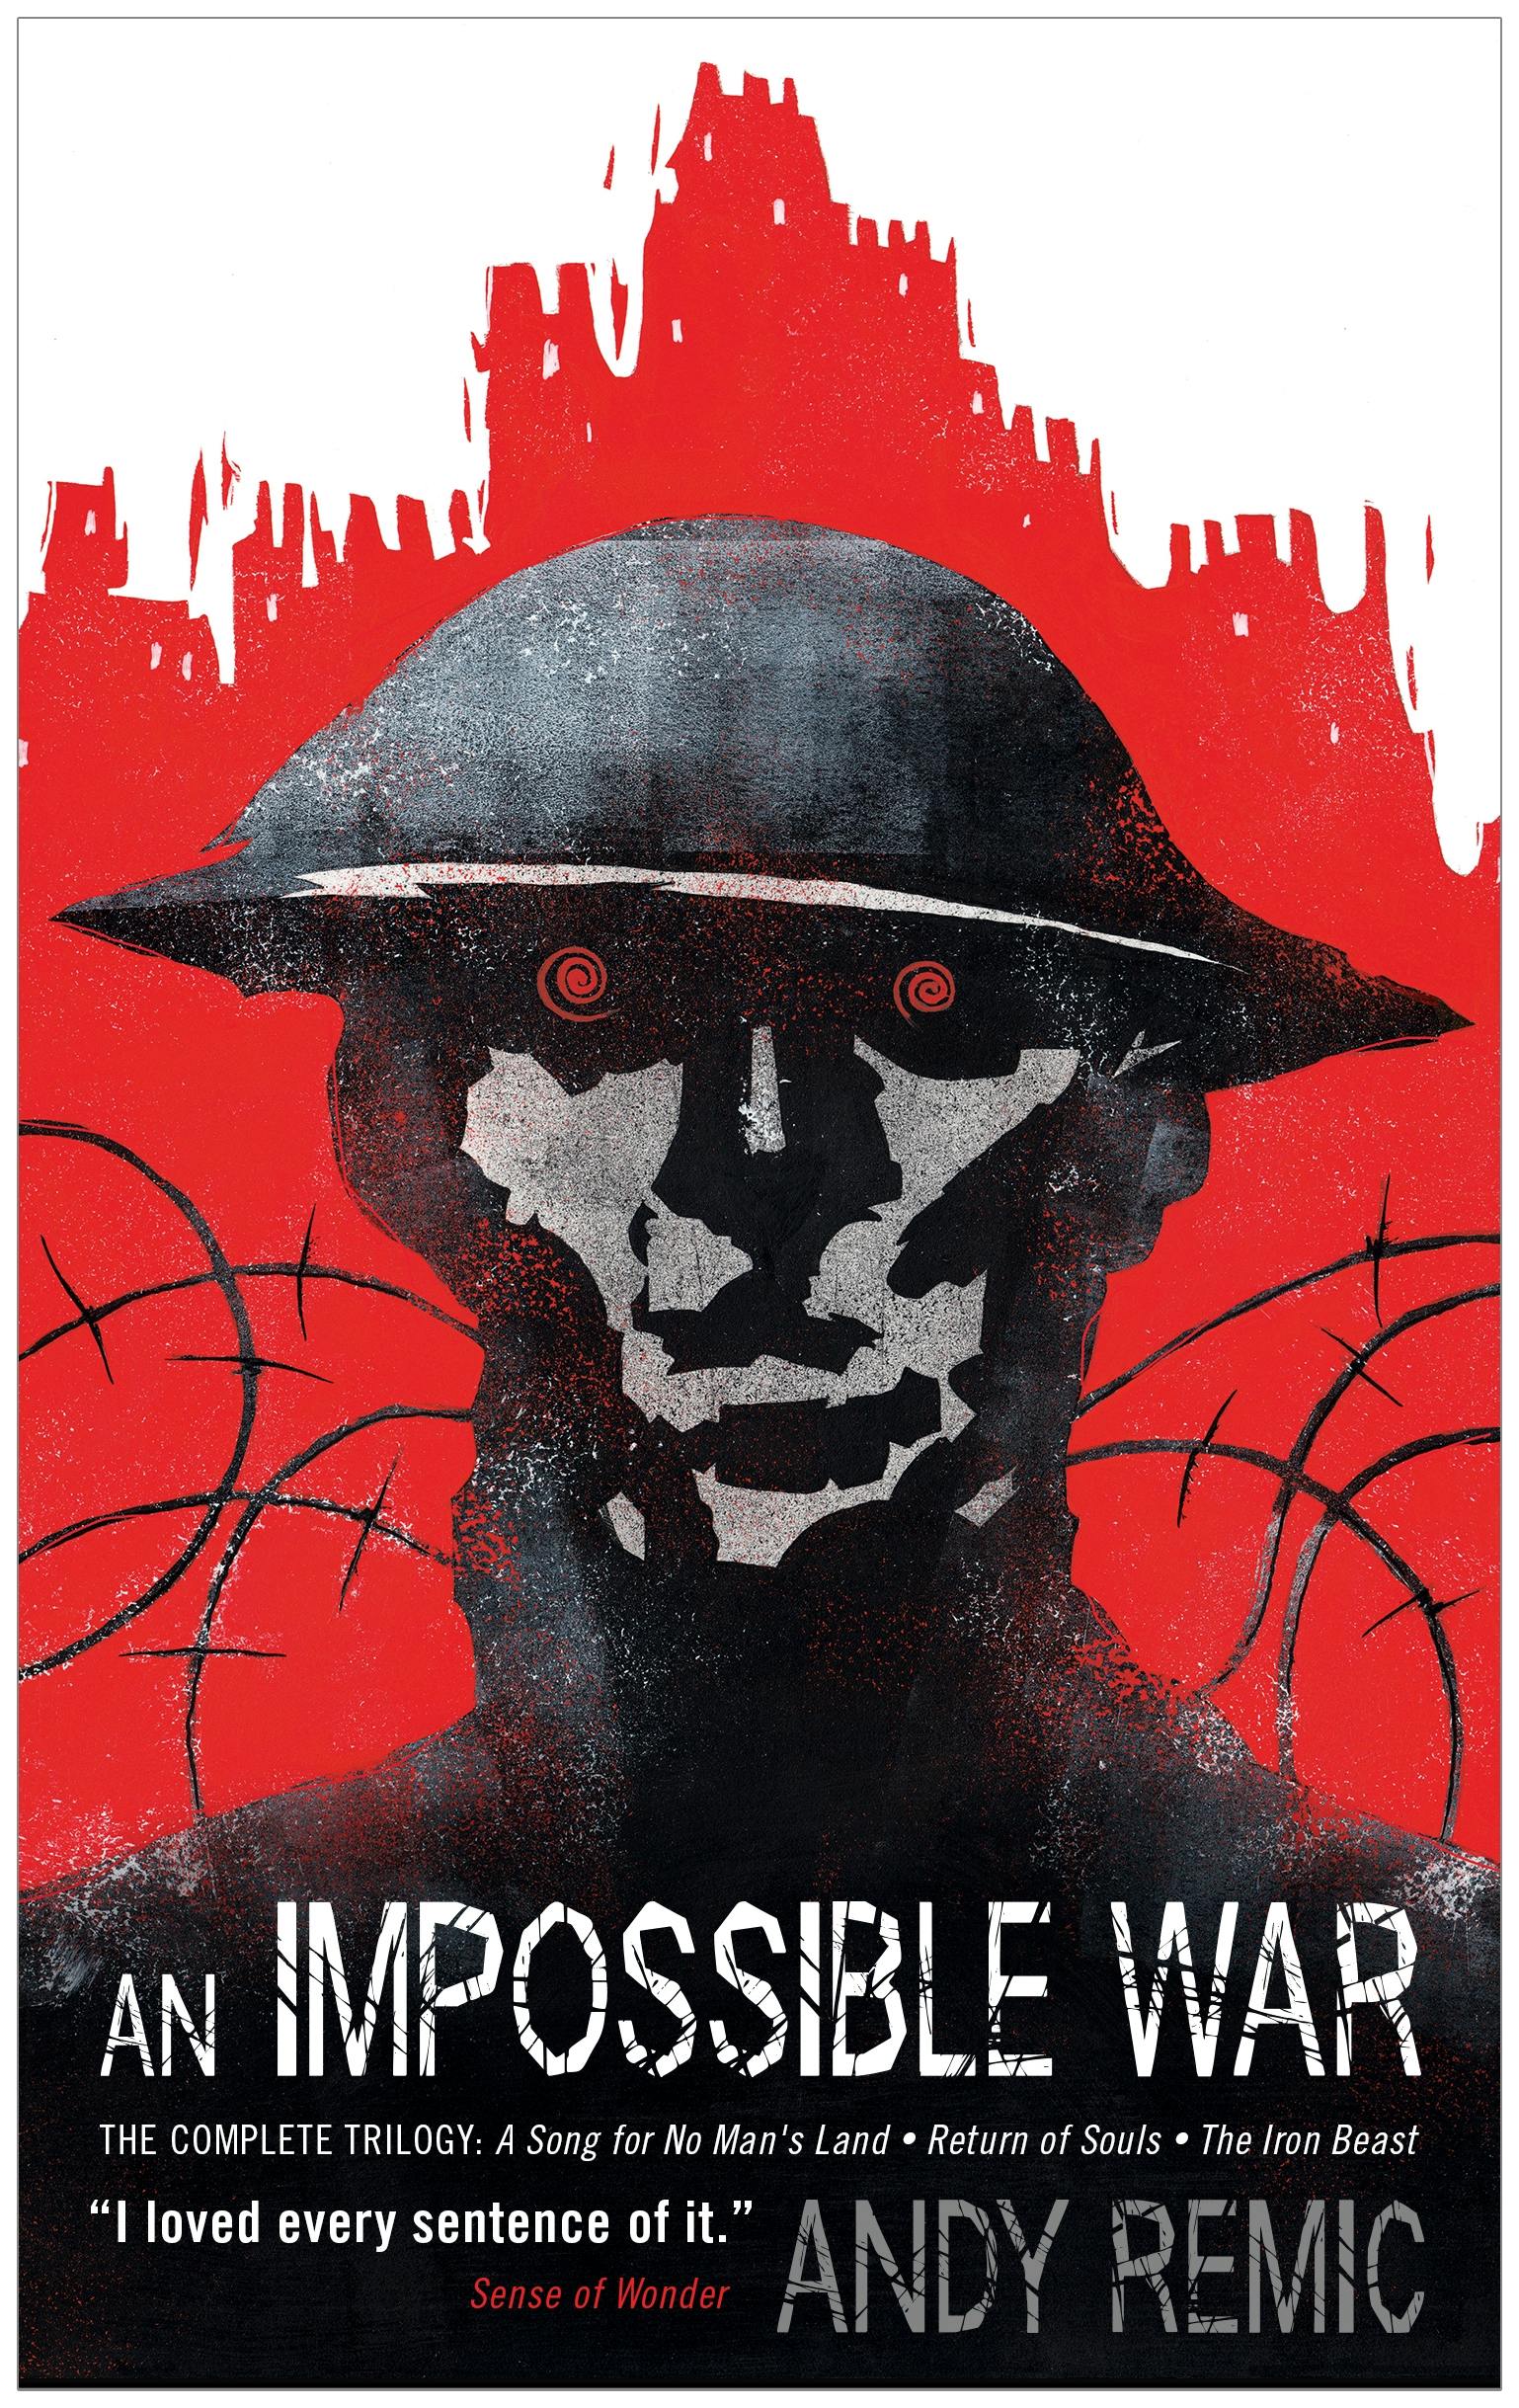 Cover for the book titled as: An Impossible War